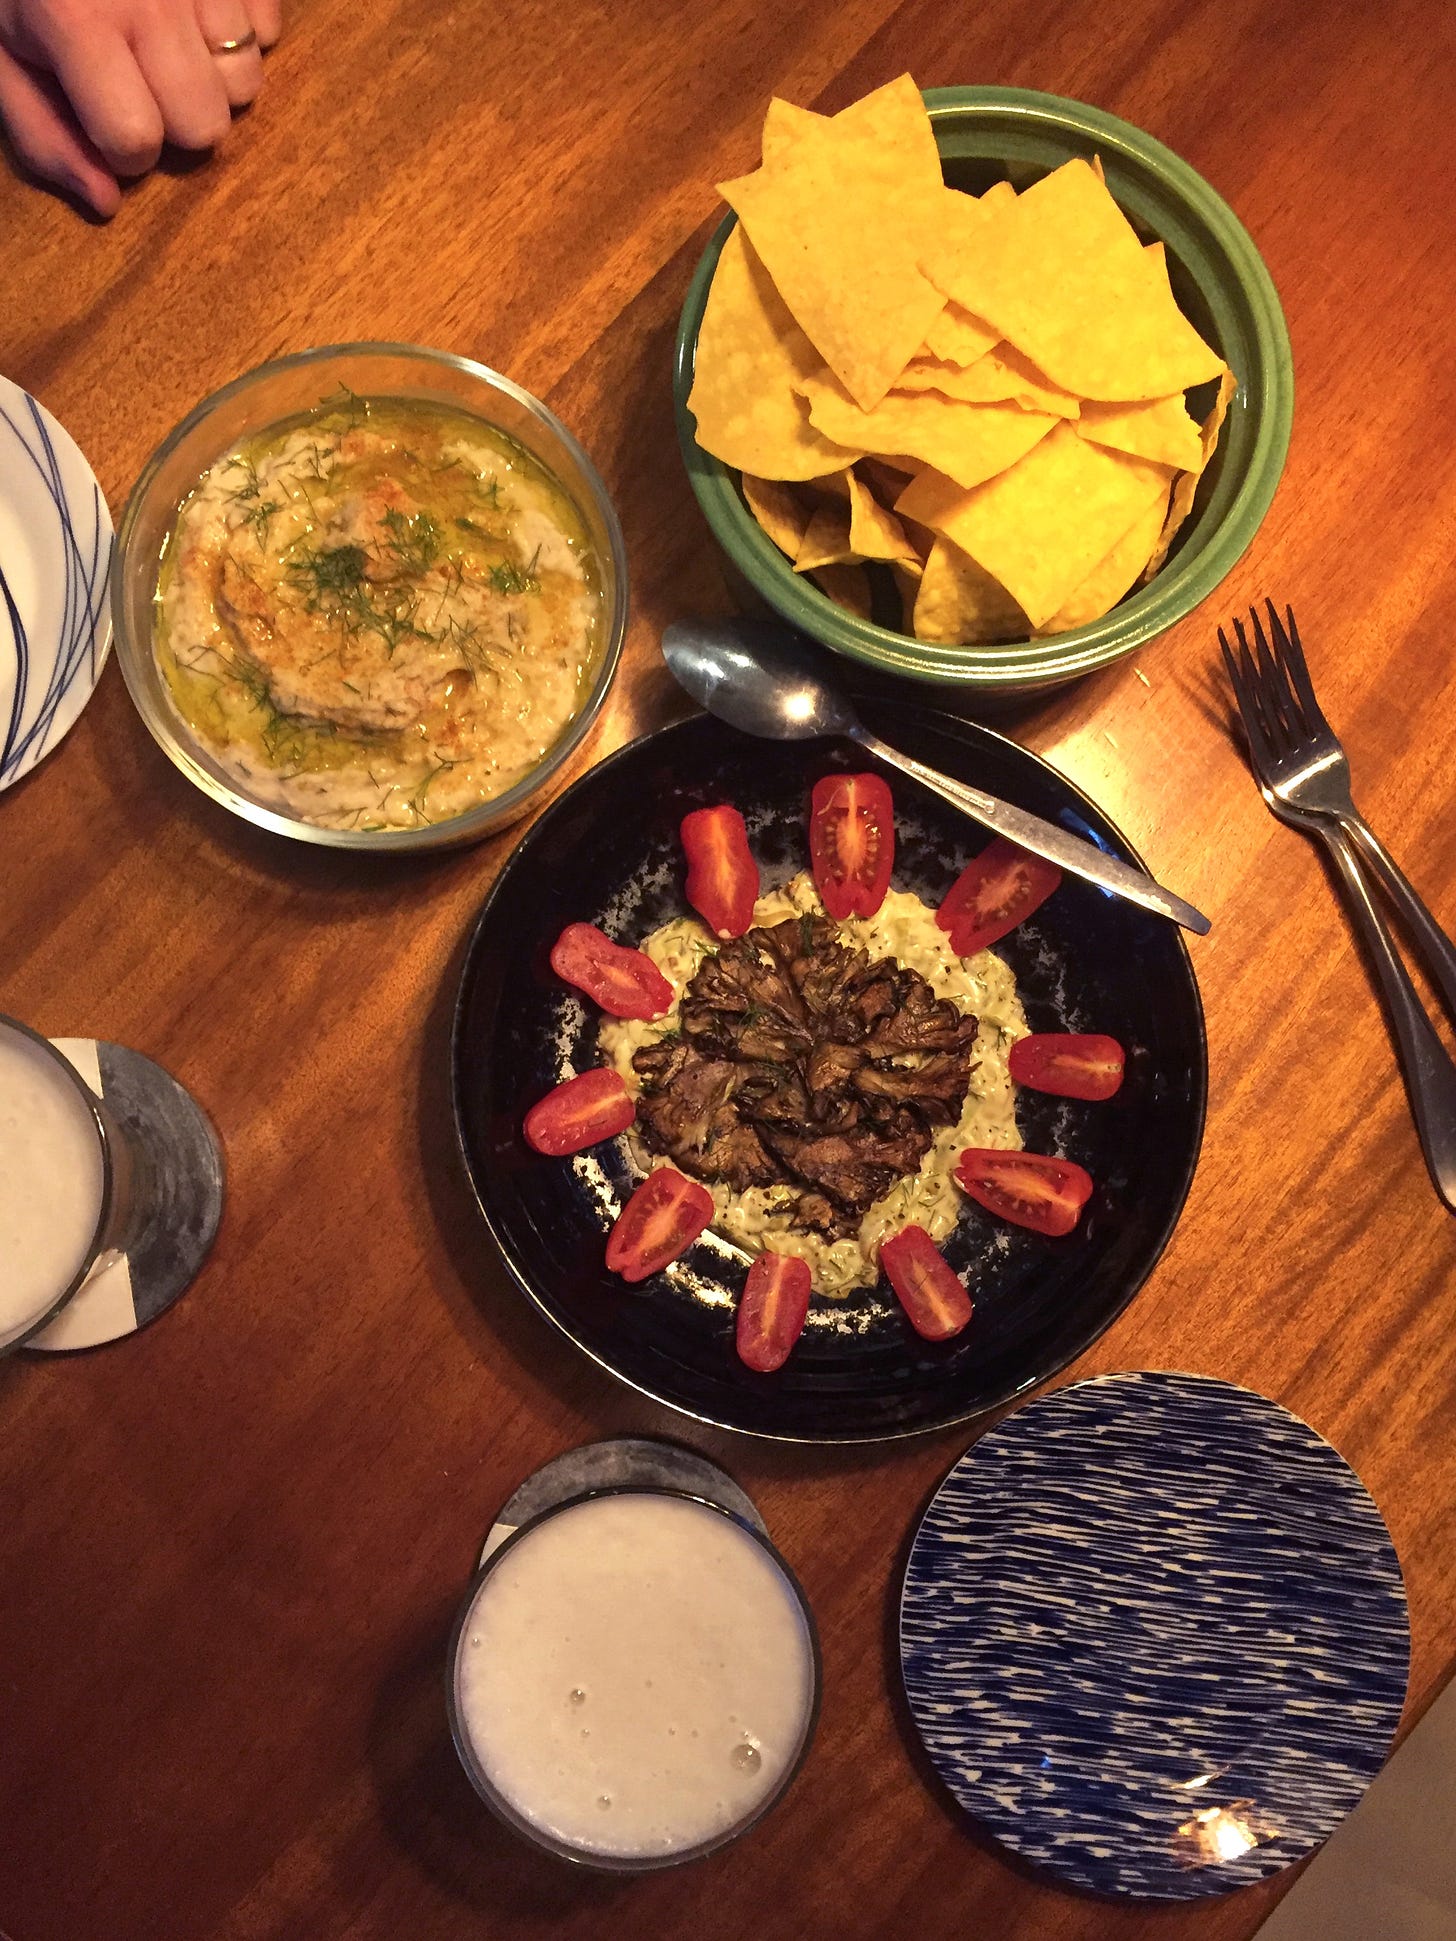 From above, a table with an arrangement of dishes: a glass bowl of creamy bean white bean dip, a green ceramic bowl of tortilla chips, and below them, a black shallow dish with maitakes resting on top of the remoulade, with small tomatoes around the edge.